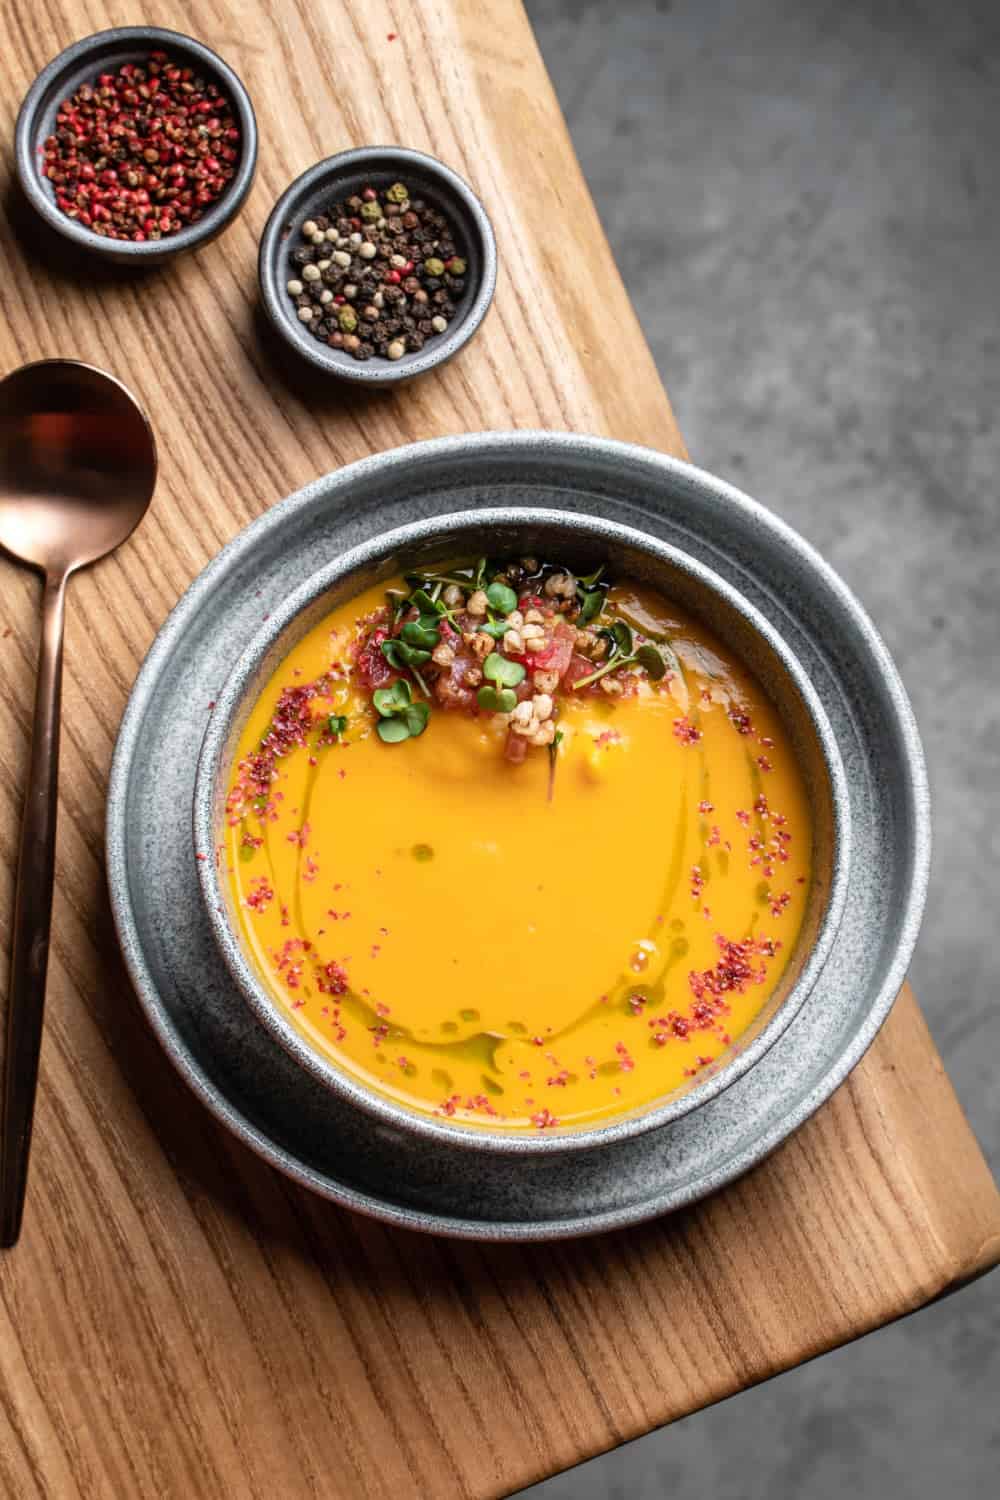 Silky Smooth Thai Butternut Soup | Cooking Clue | The Eater's Manifesto